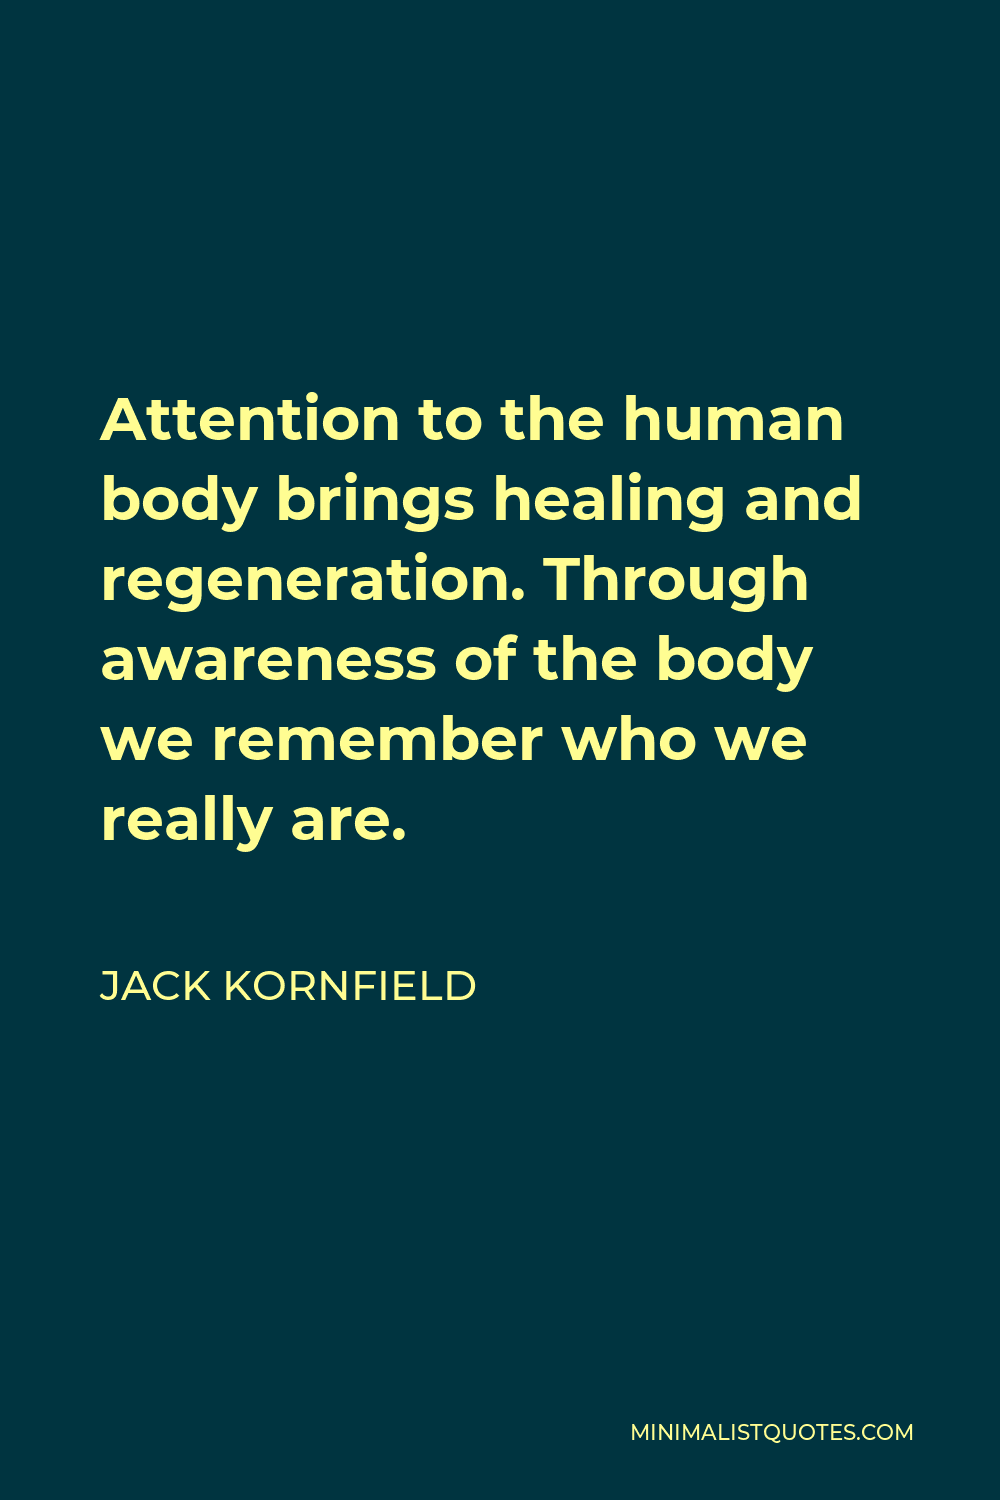 Jack Kornfield Quote - Attention to the human body brings healing and regeneration. Through awareness of the body we remember who we really are.